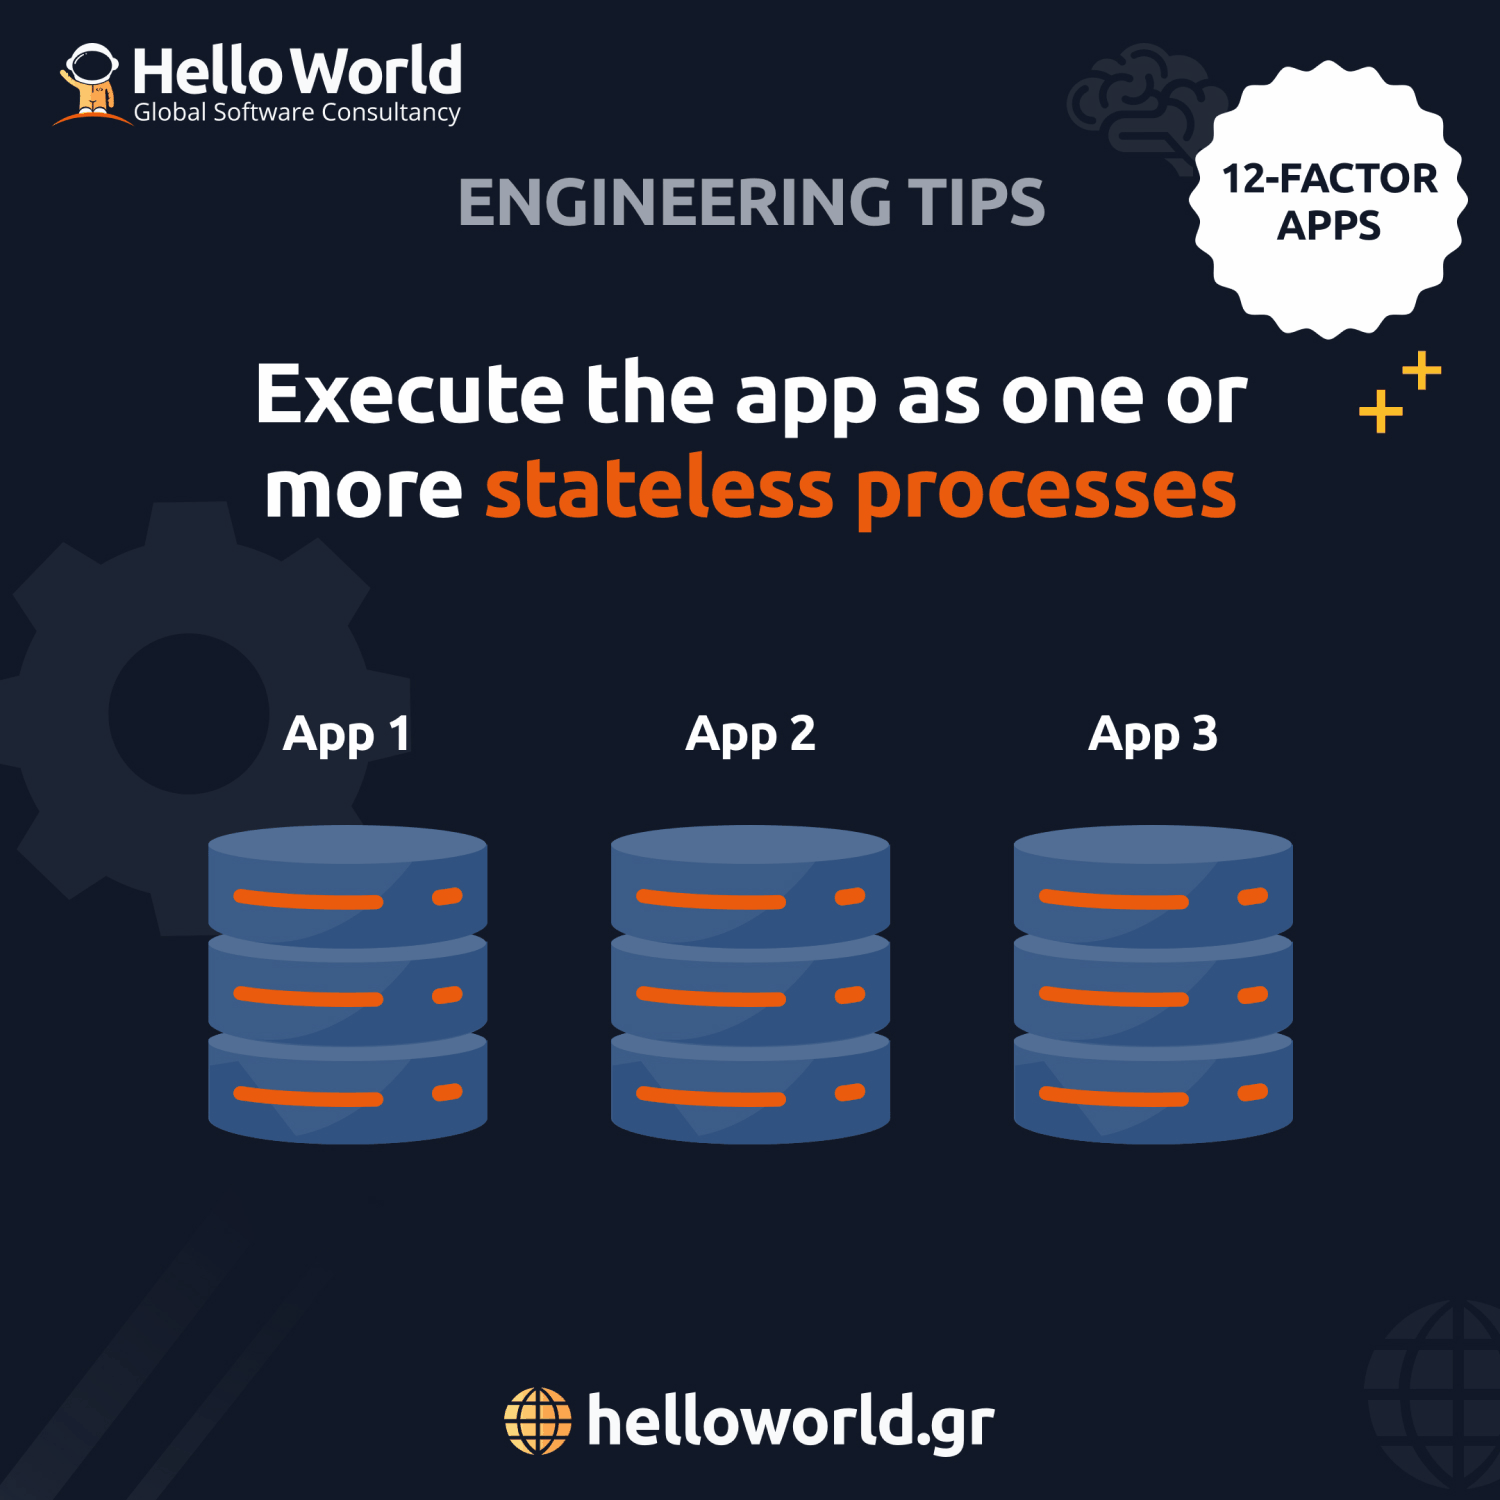 Processes: Execute the app as one or more stateless processes